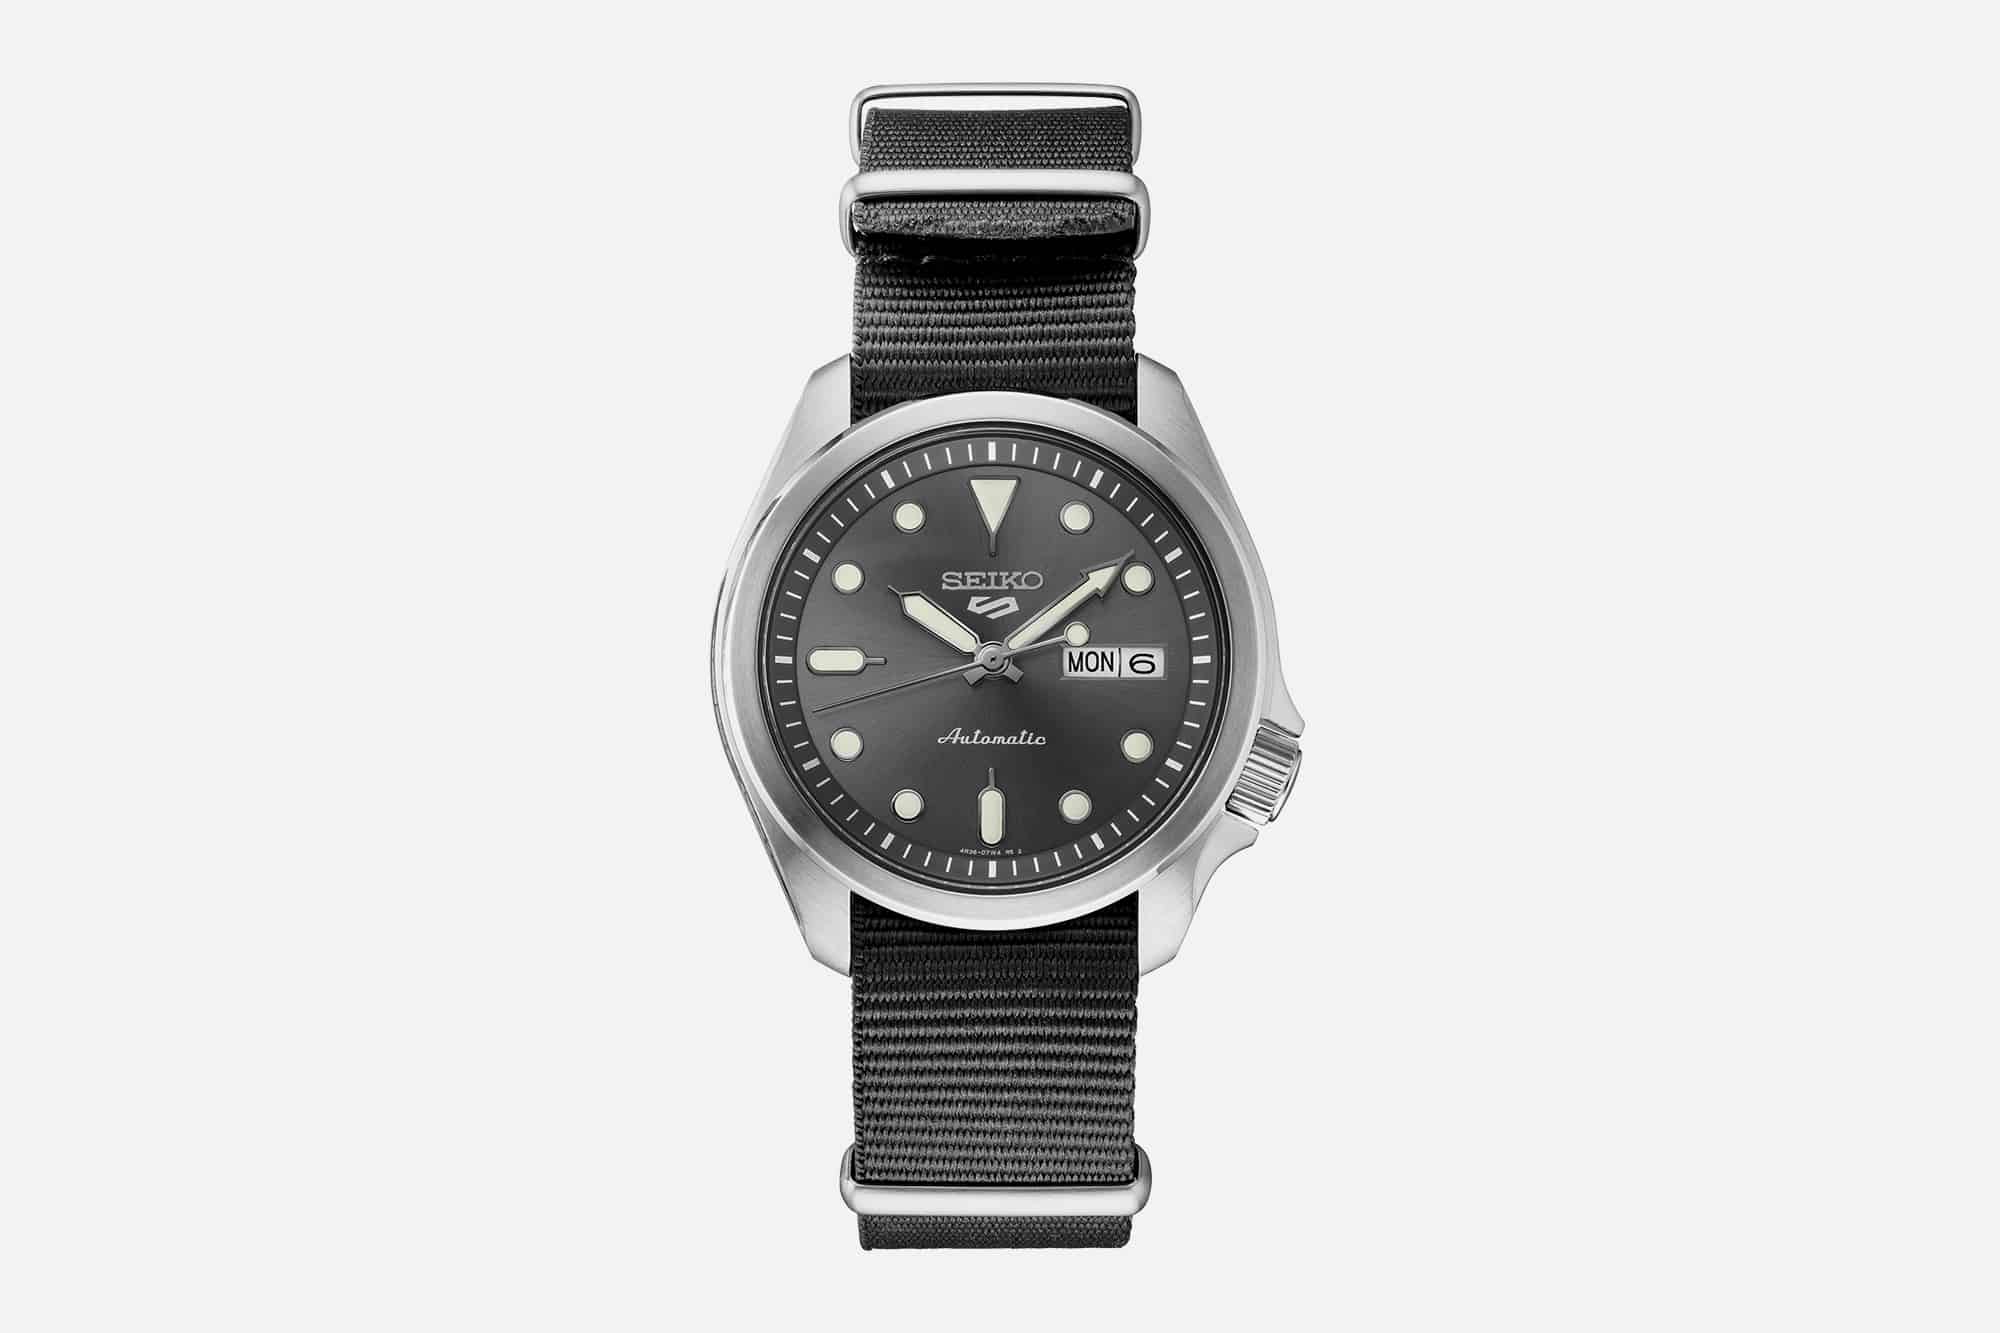 New Watches in the Seiko 5 Sports Collection Lose the Dive Bezel with ...